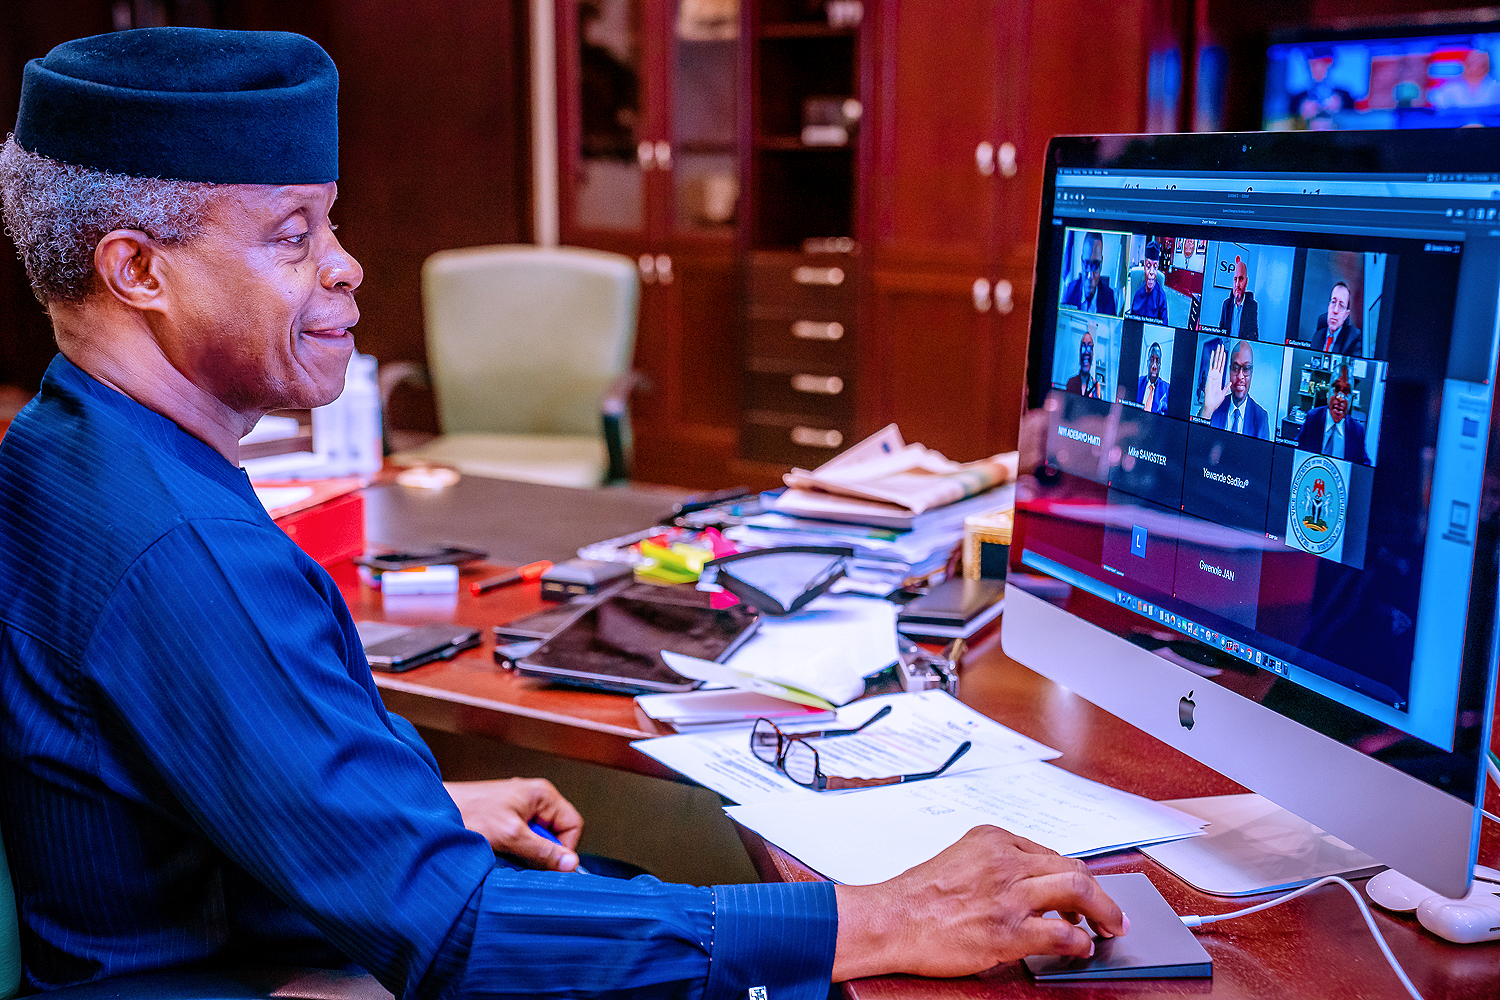 VP Osinbajo Participates In A Virtual Interactive Session With French Business Leaders On 24/11/2020